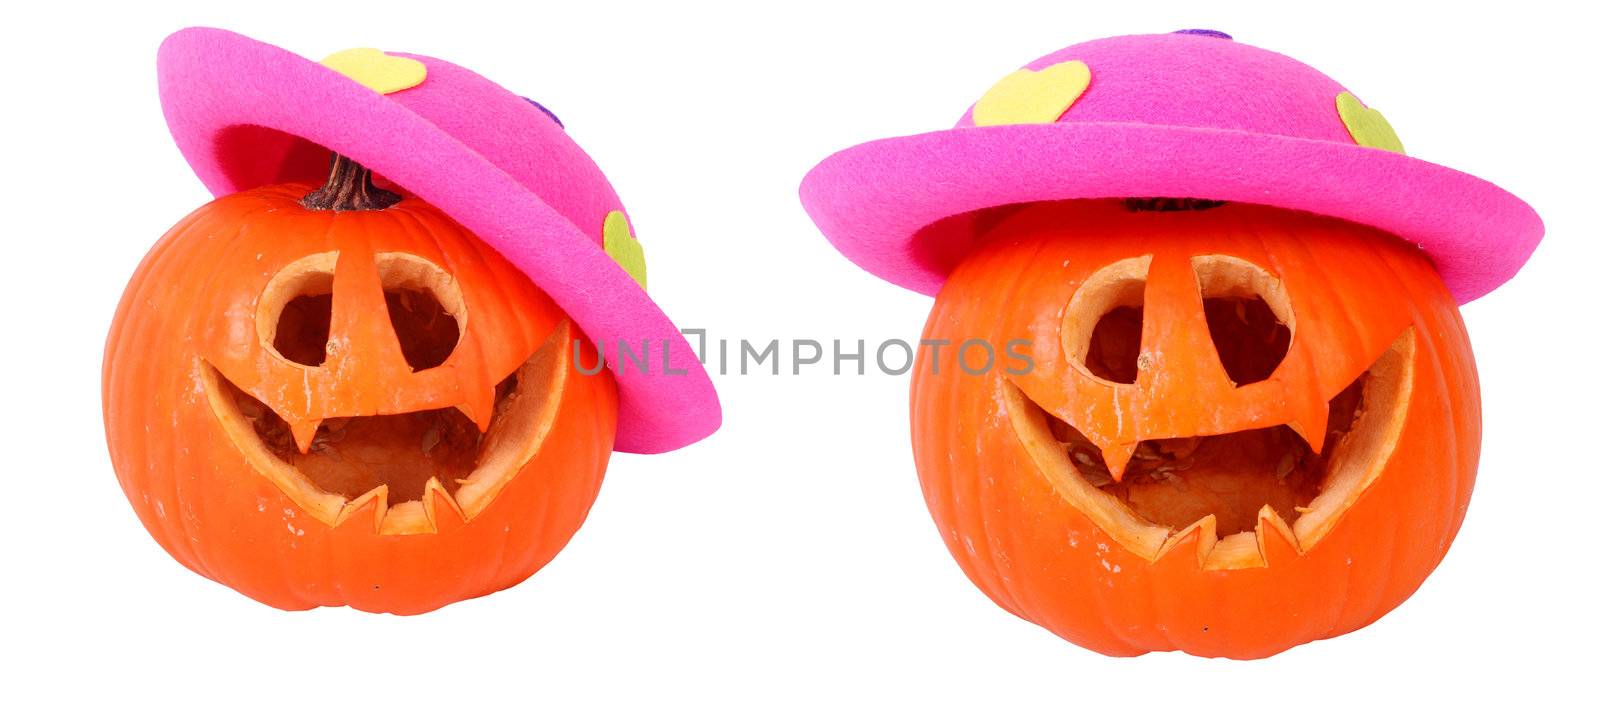 Helloween pumpkin with pink head, isolated on background